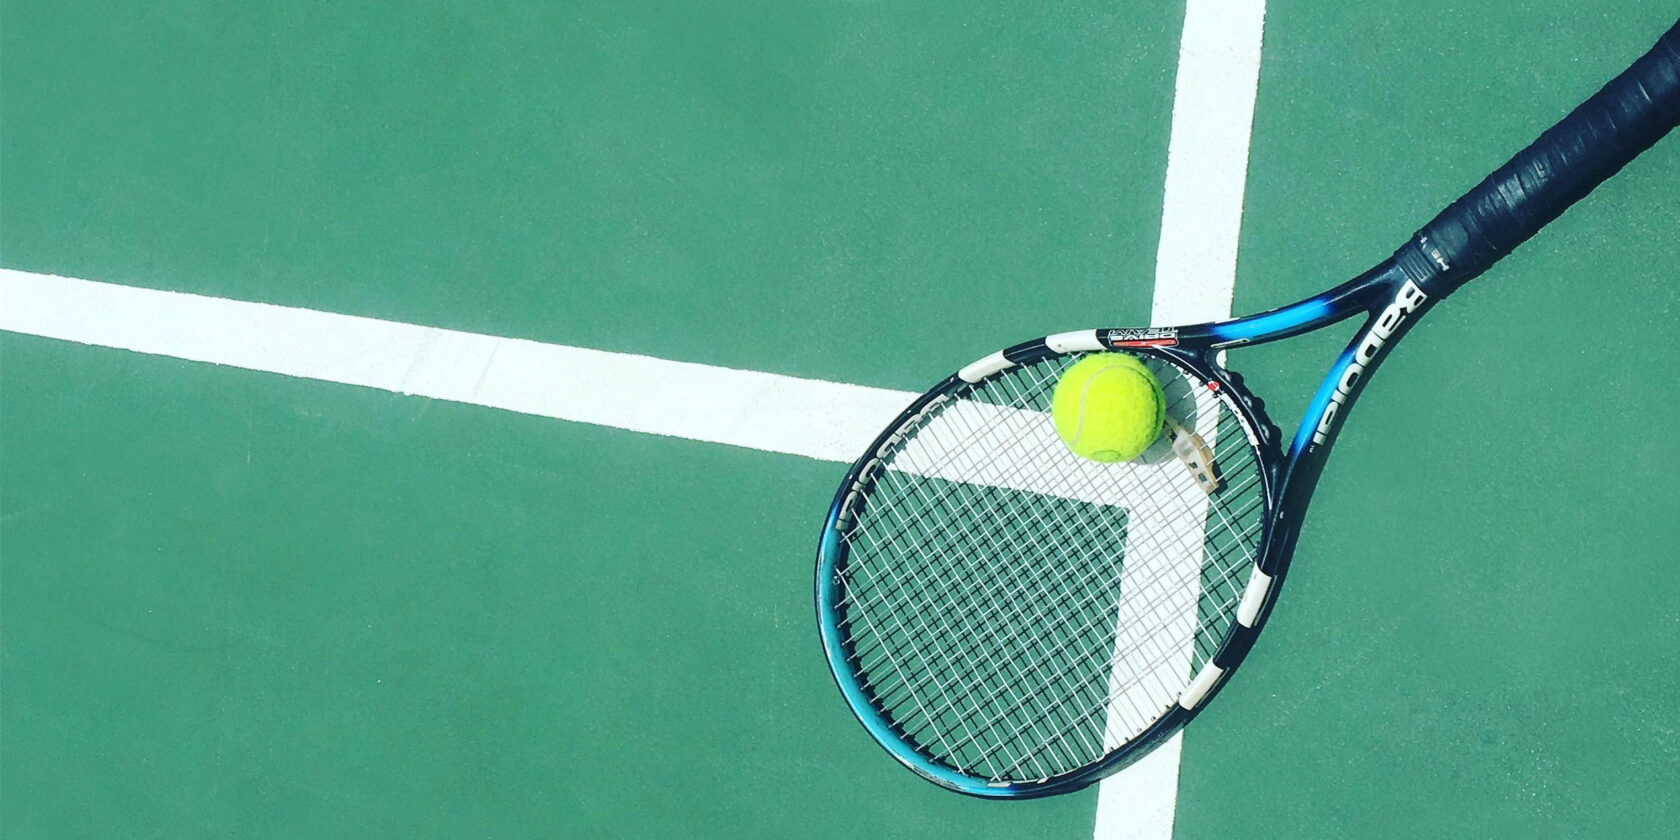 A tennis racket and ball.